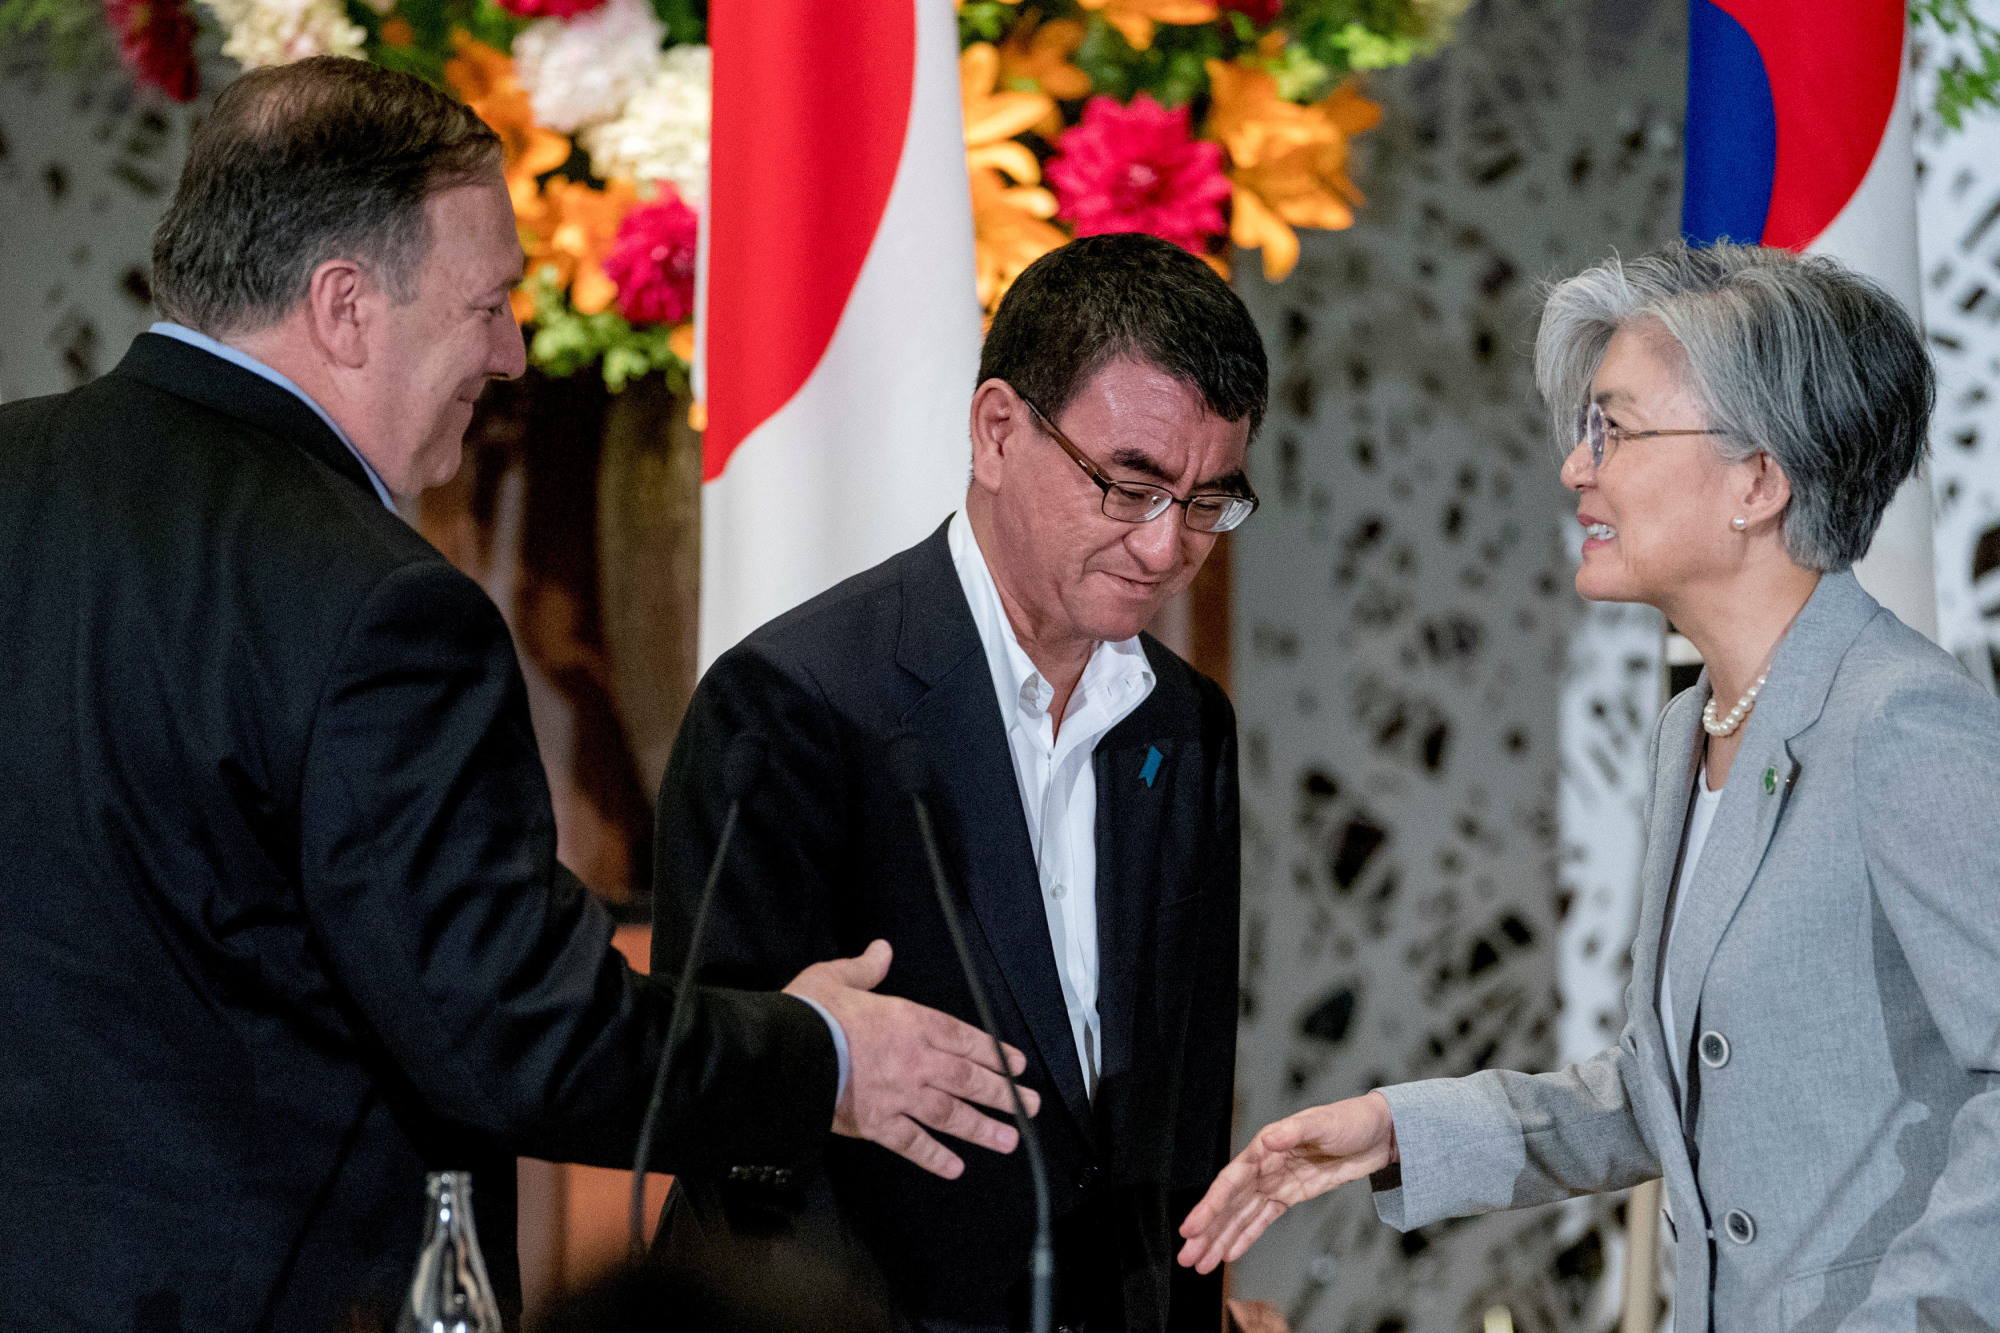 U.S. Secretary of State Mike Pompeo, Foreign Minister Taro Kono and South Korean Foreign Minister Kang Kyung-wha shake hands after their joint news conference in Tokyo on Sunday. | POOL / VIA REUTERS